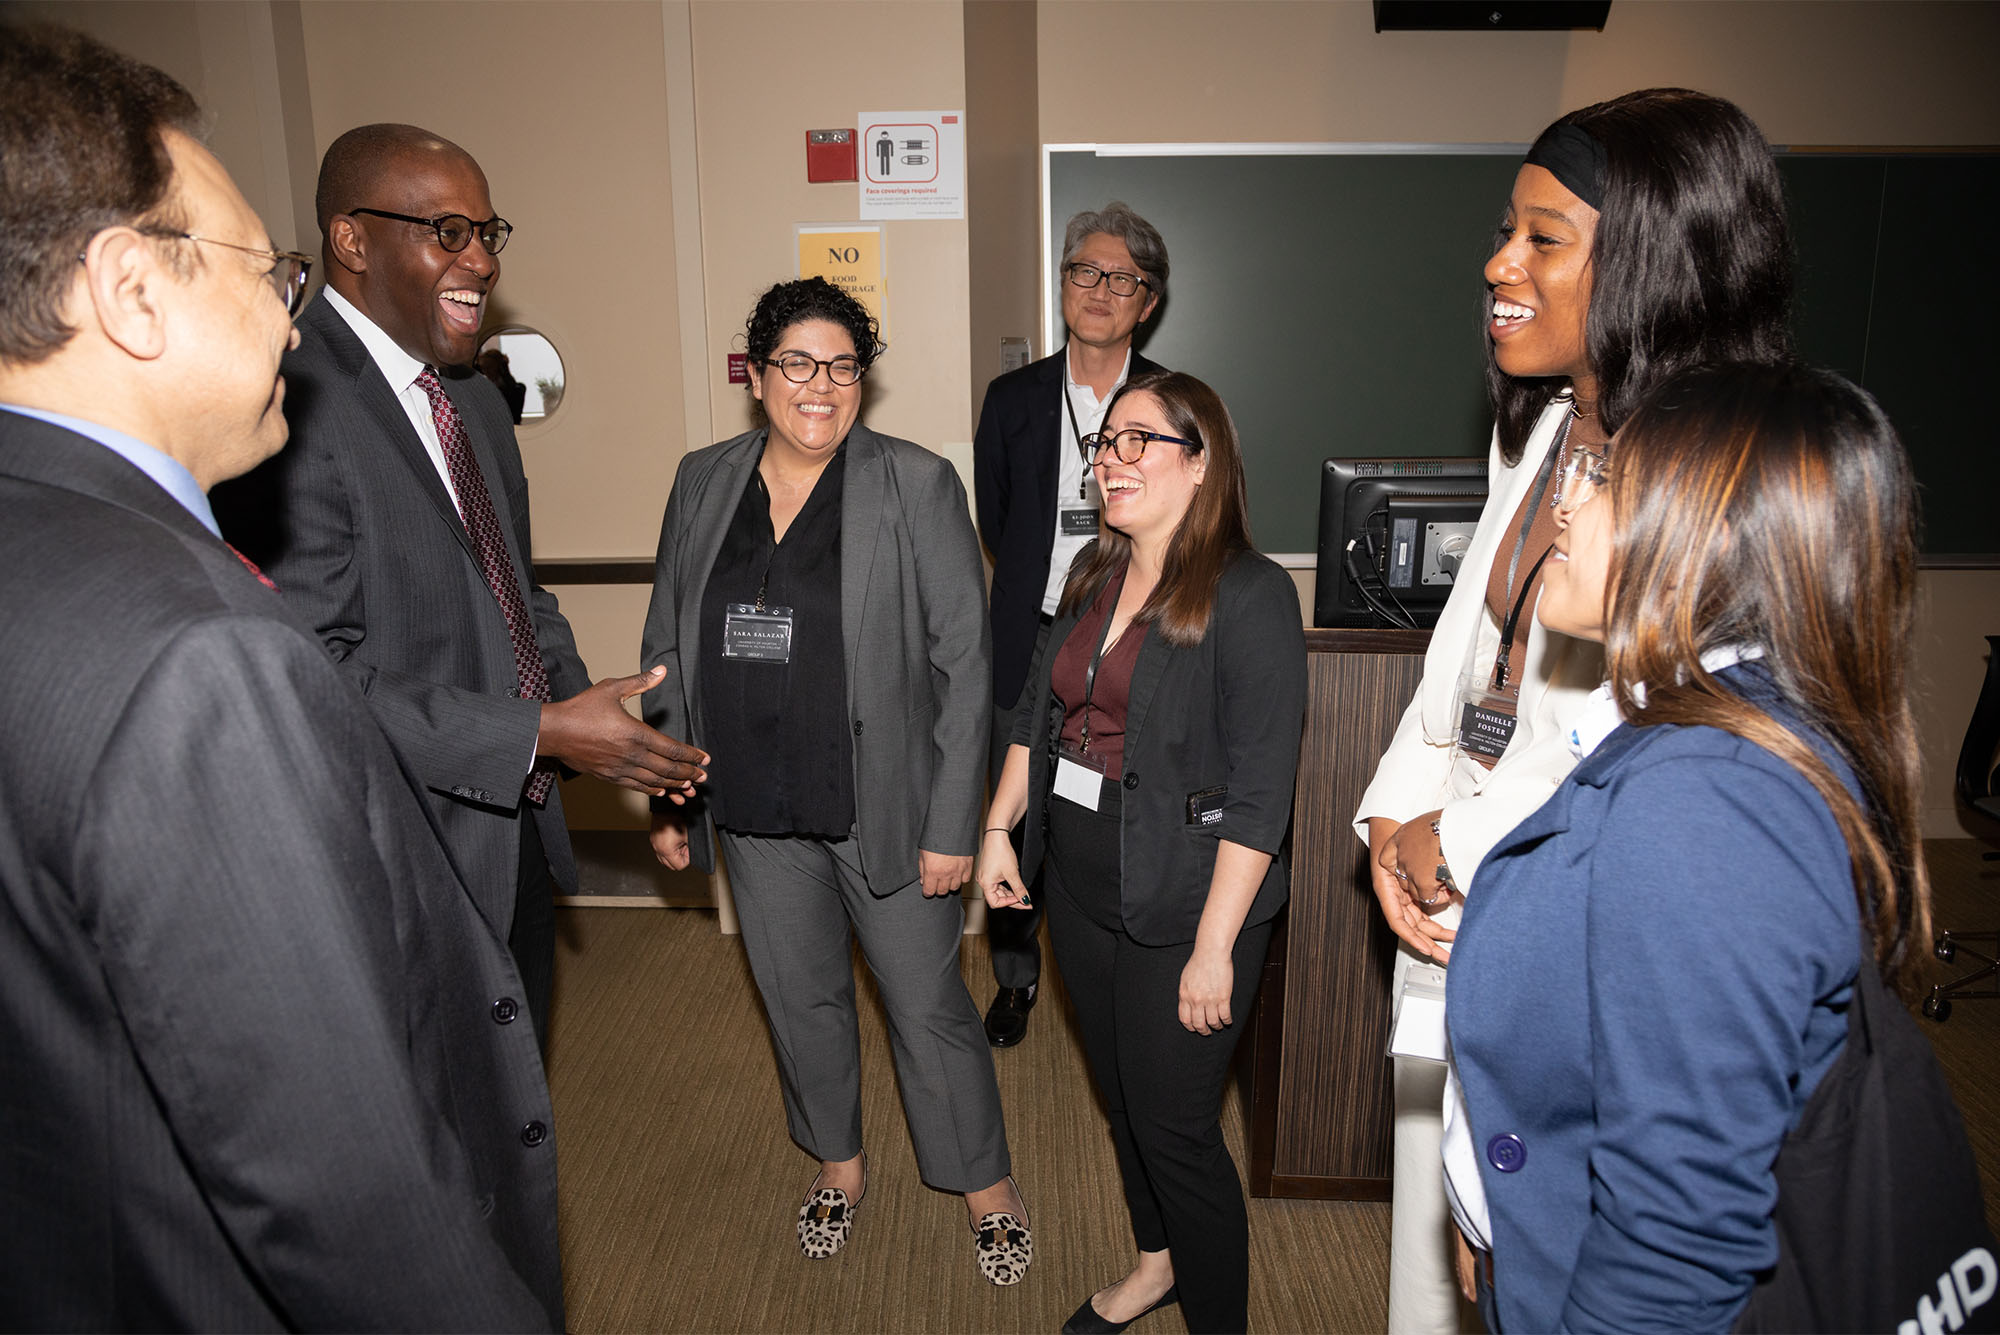 tudent attendees and hospitality faculty from across the country at the School of Hospitality Administration’s first in-person POC PhD Pathway Program in Hospitality and Tourism Conference on April 8.